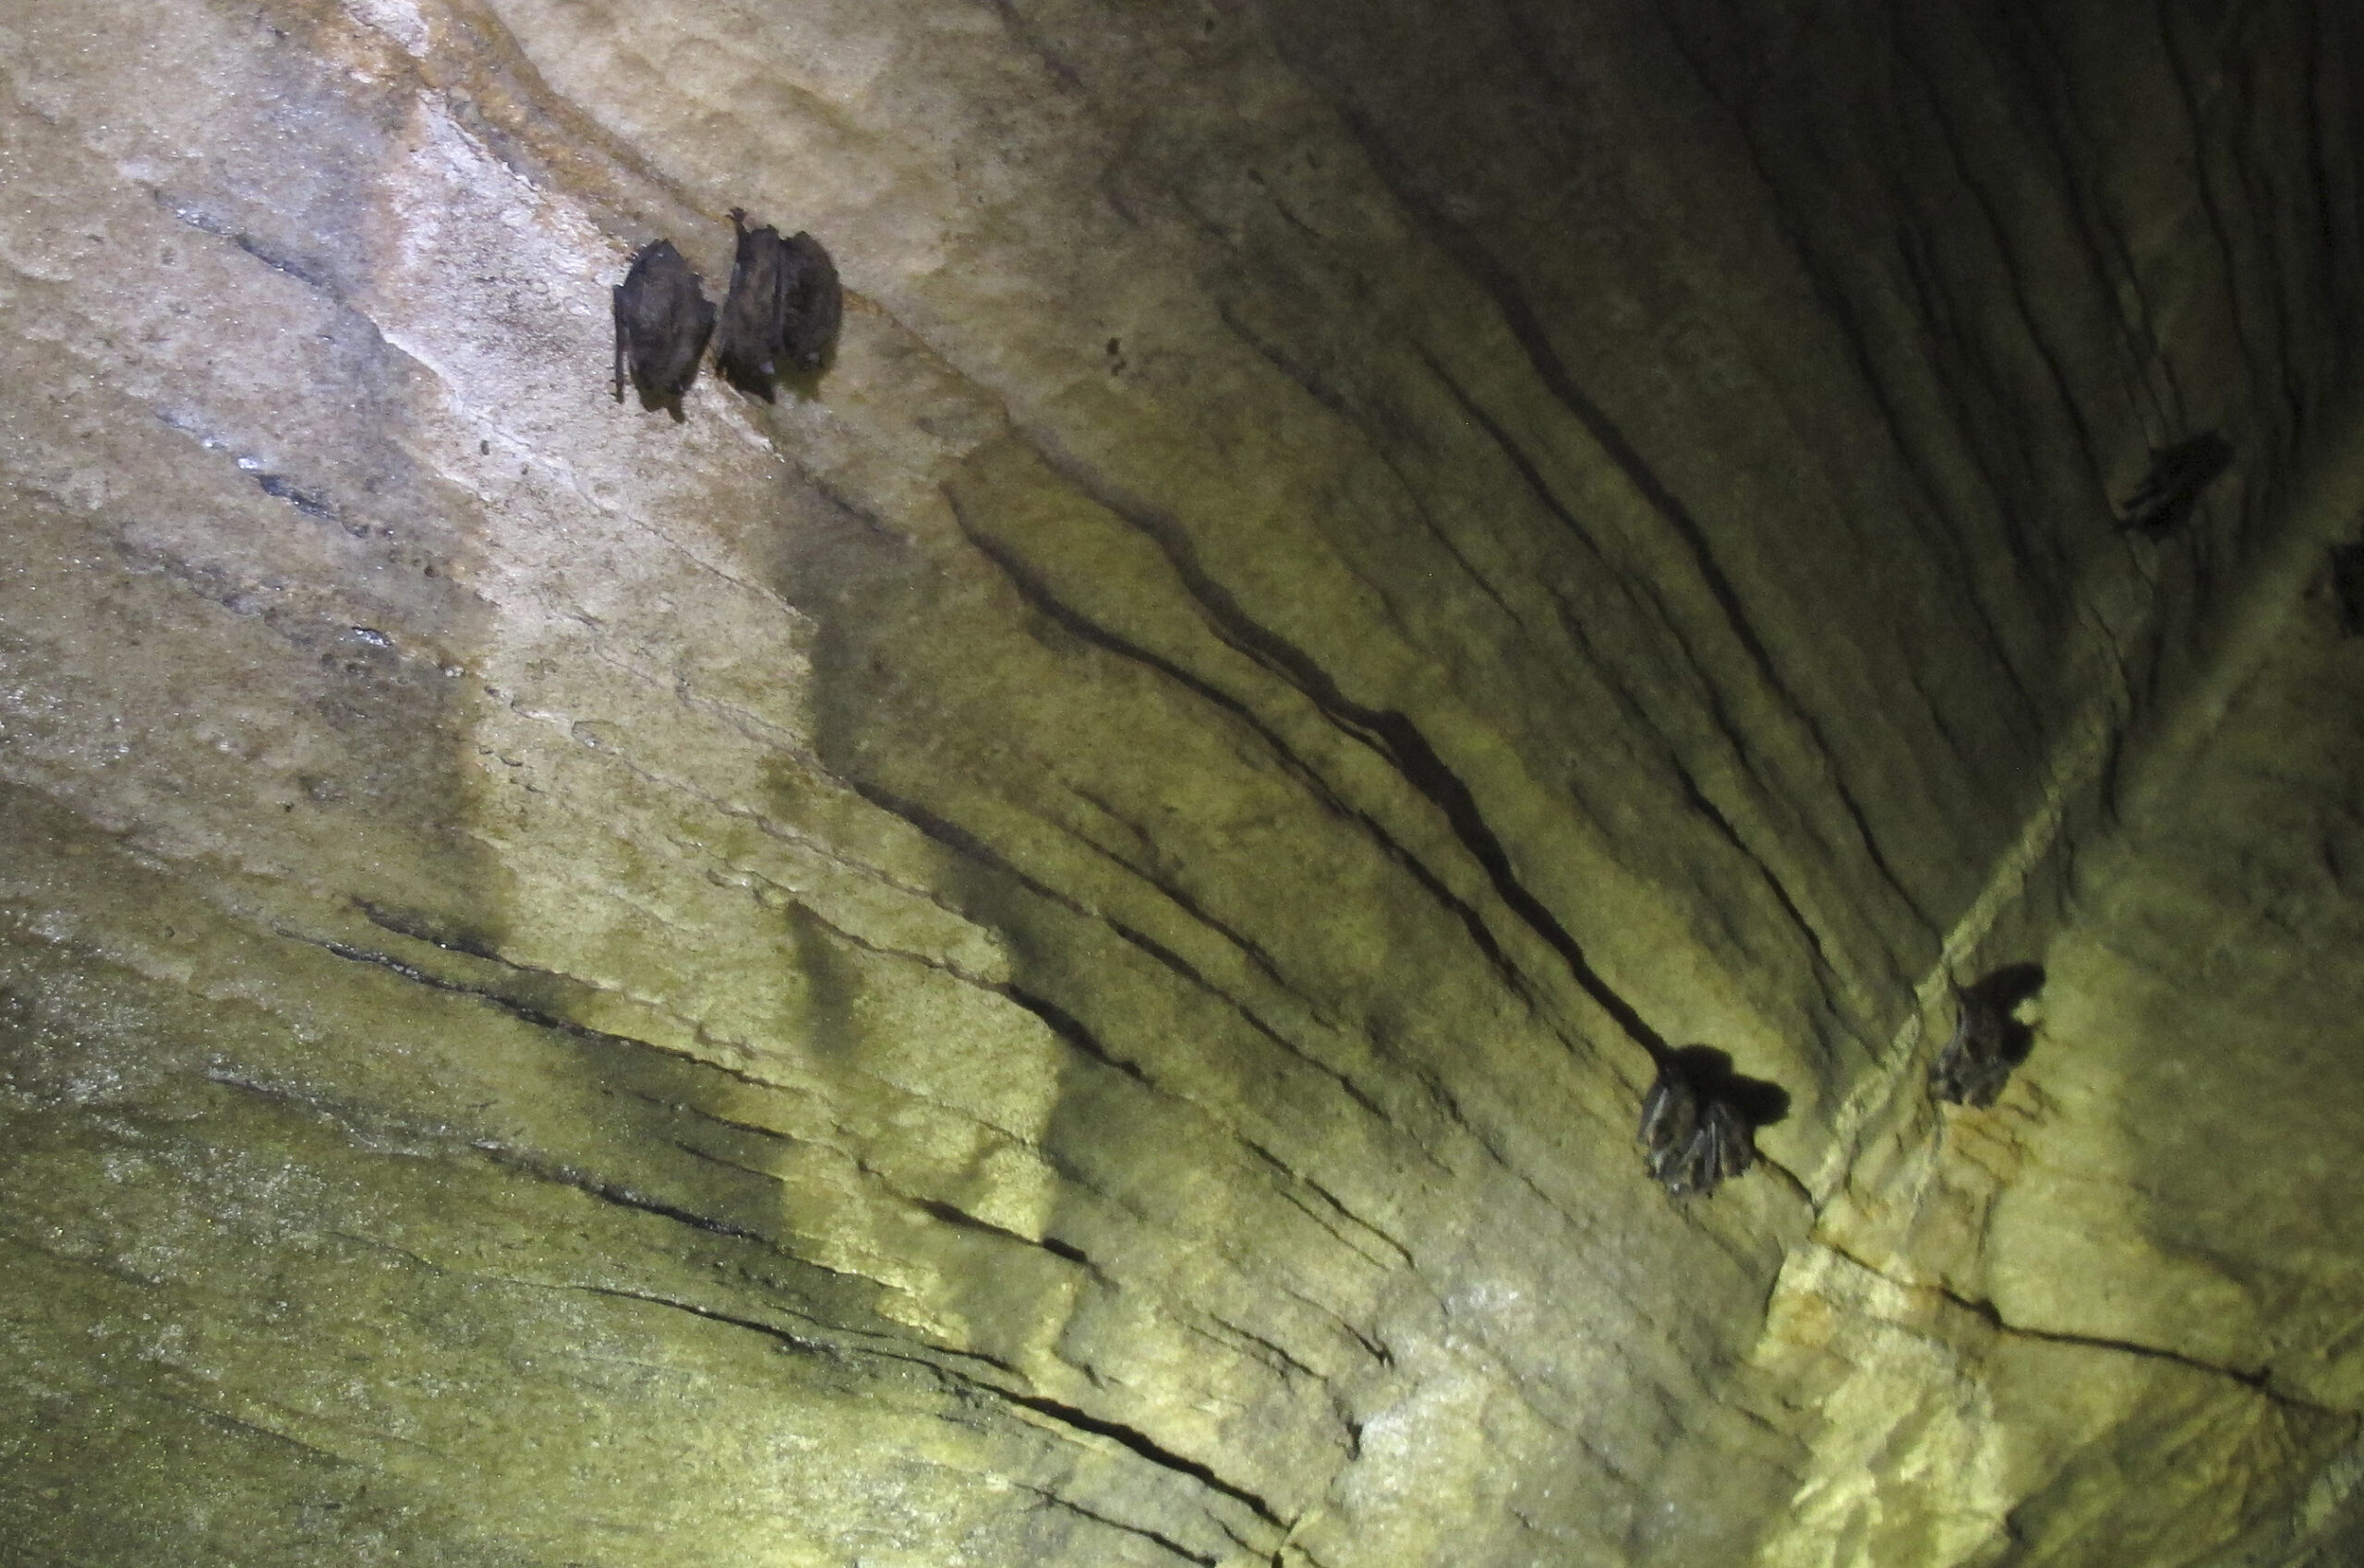 Bats hang from the ceiling of a cave